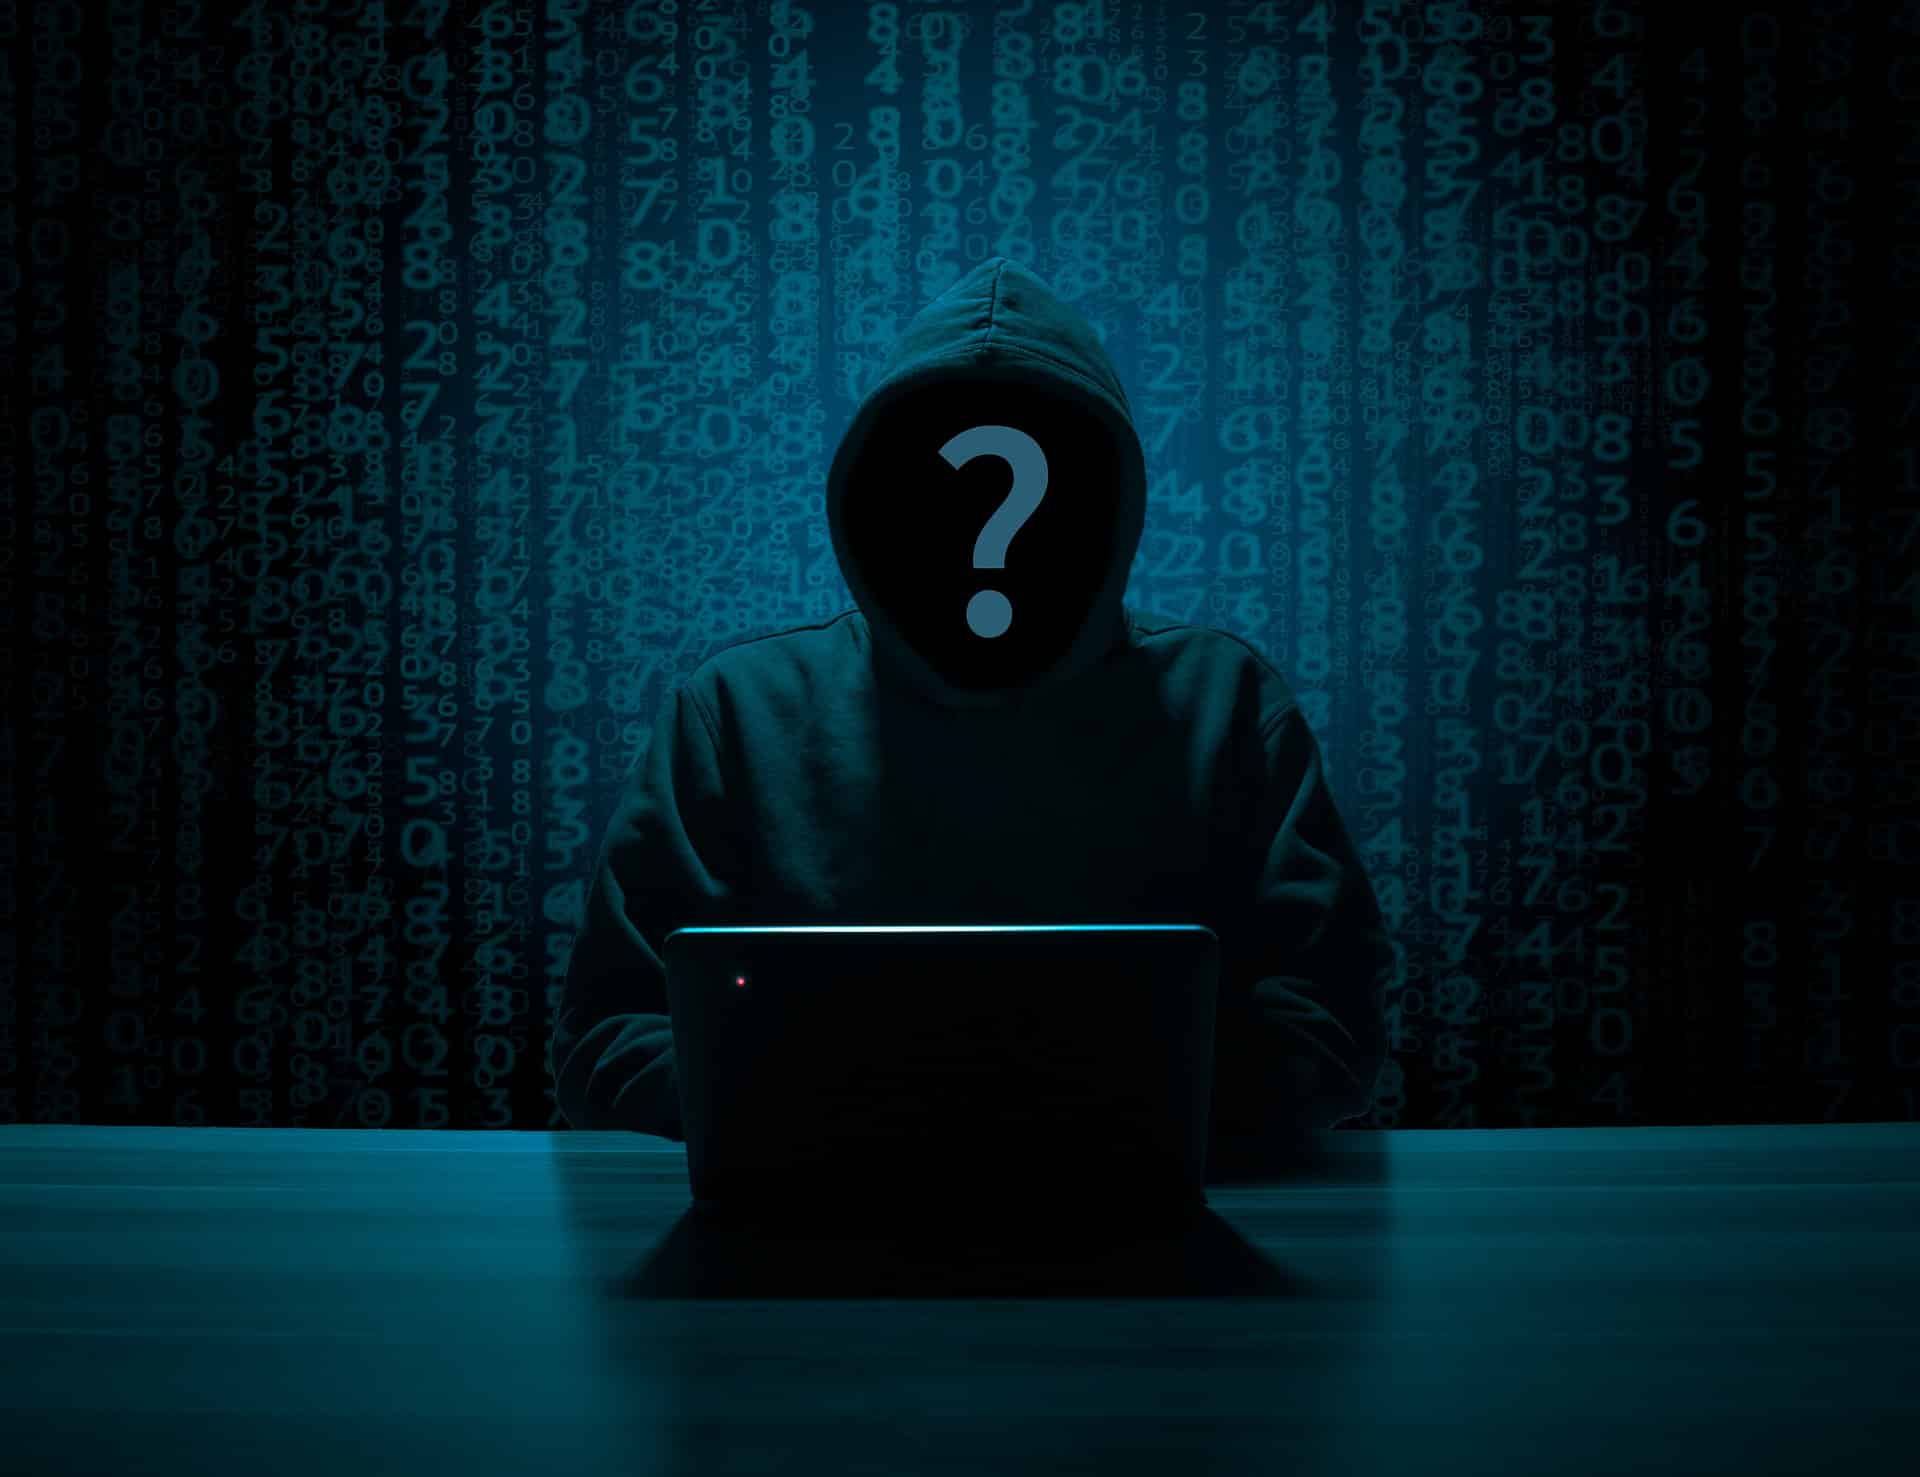 Your Business Has Been Hacked. Now What?